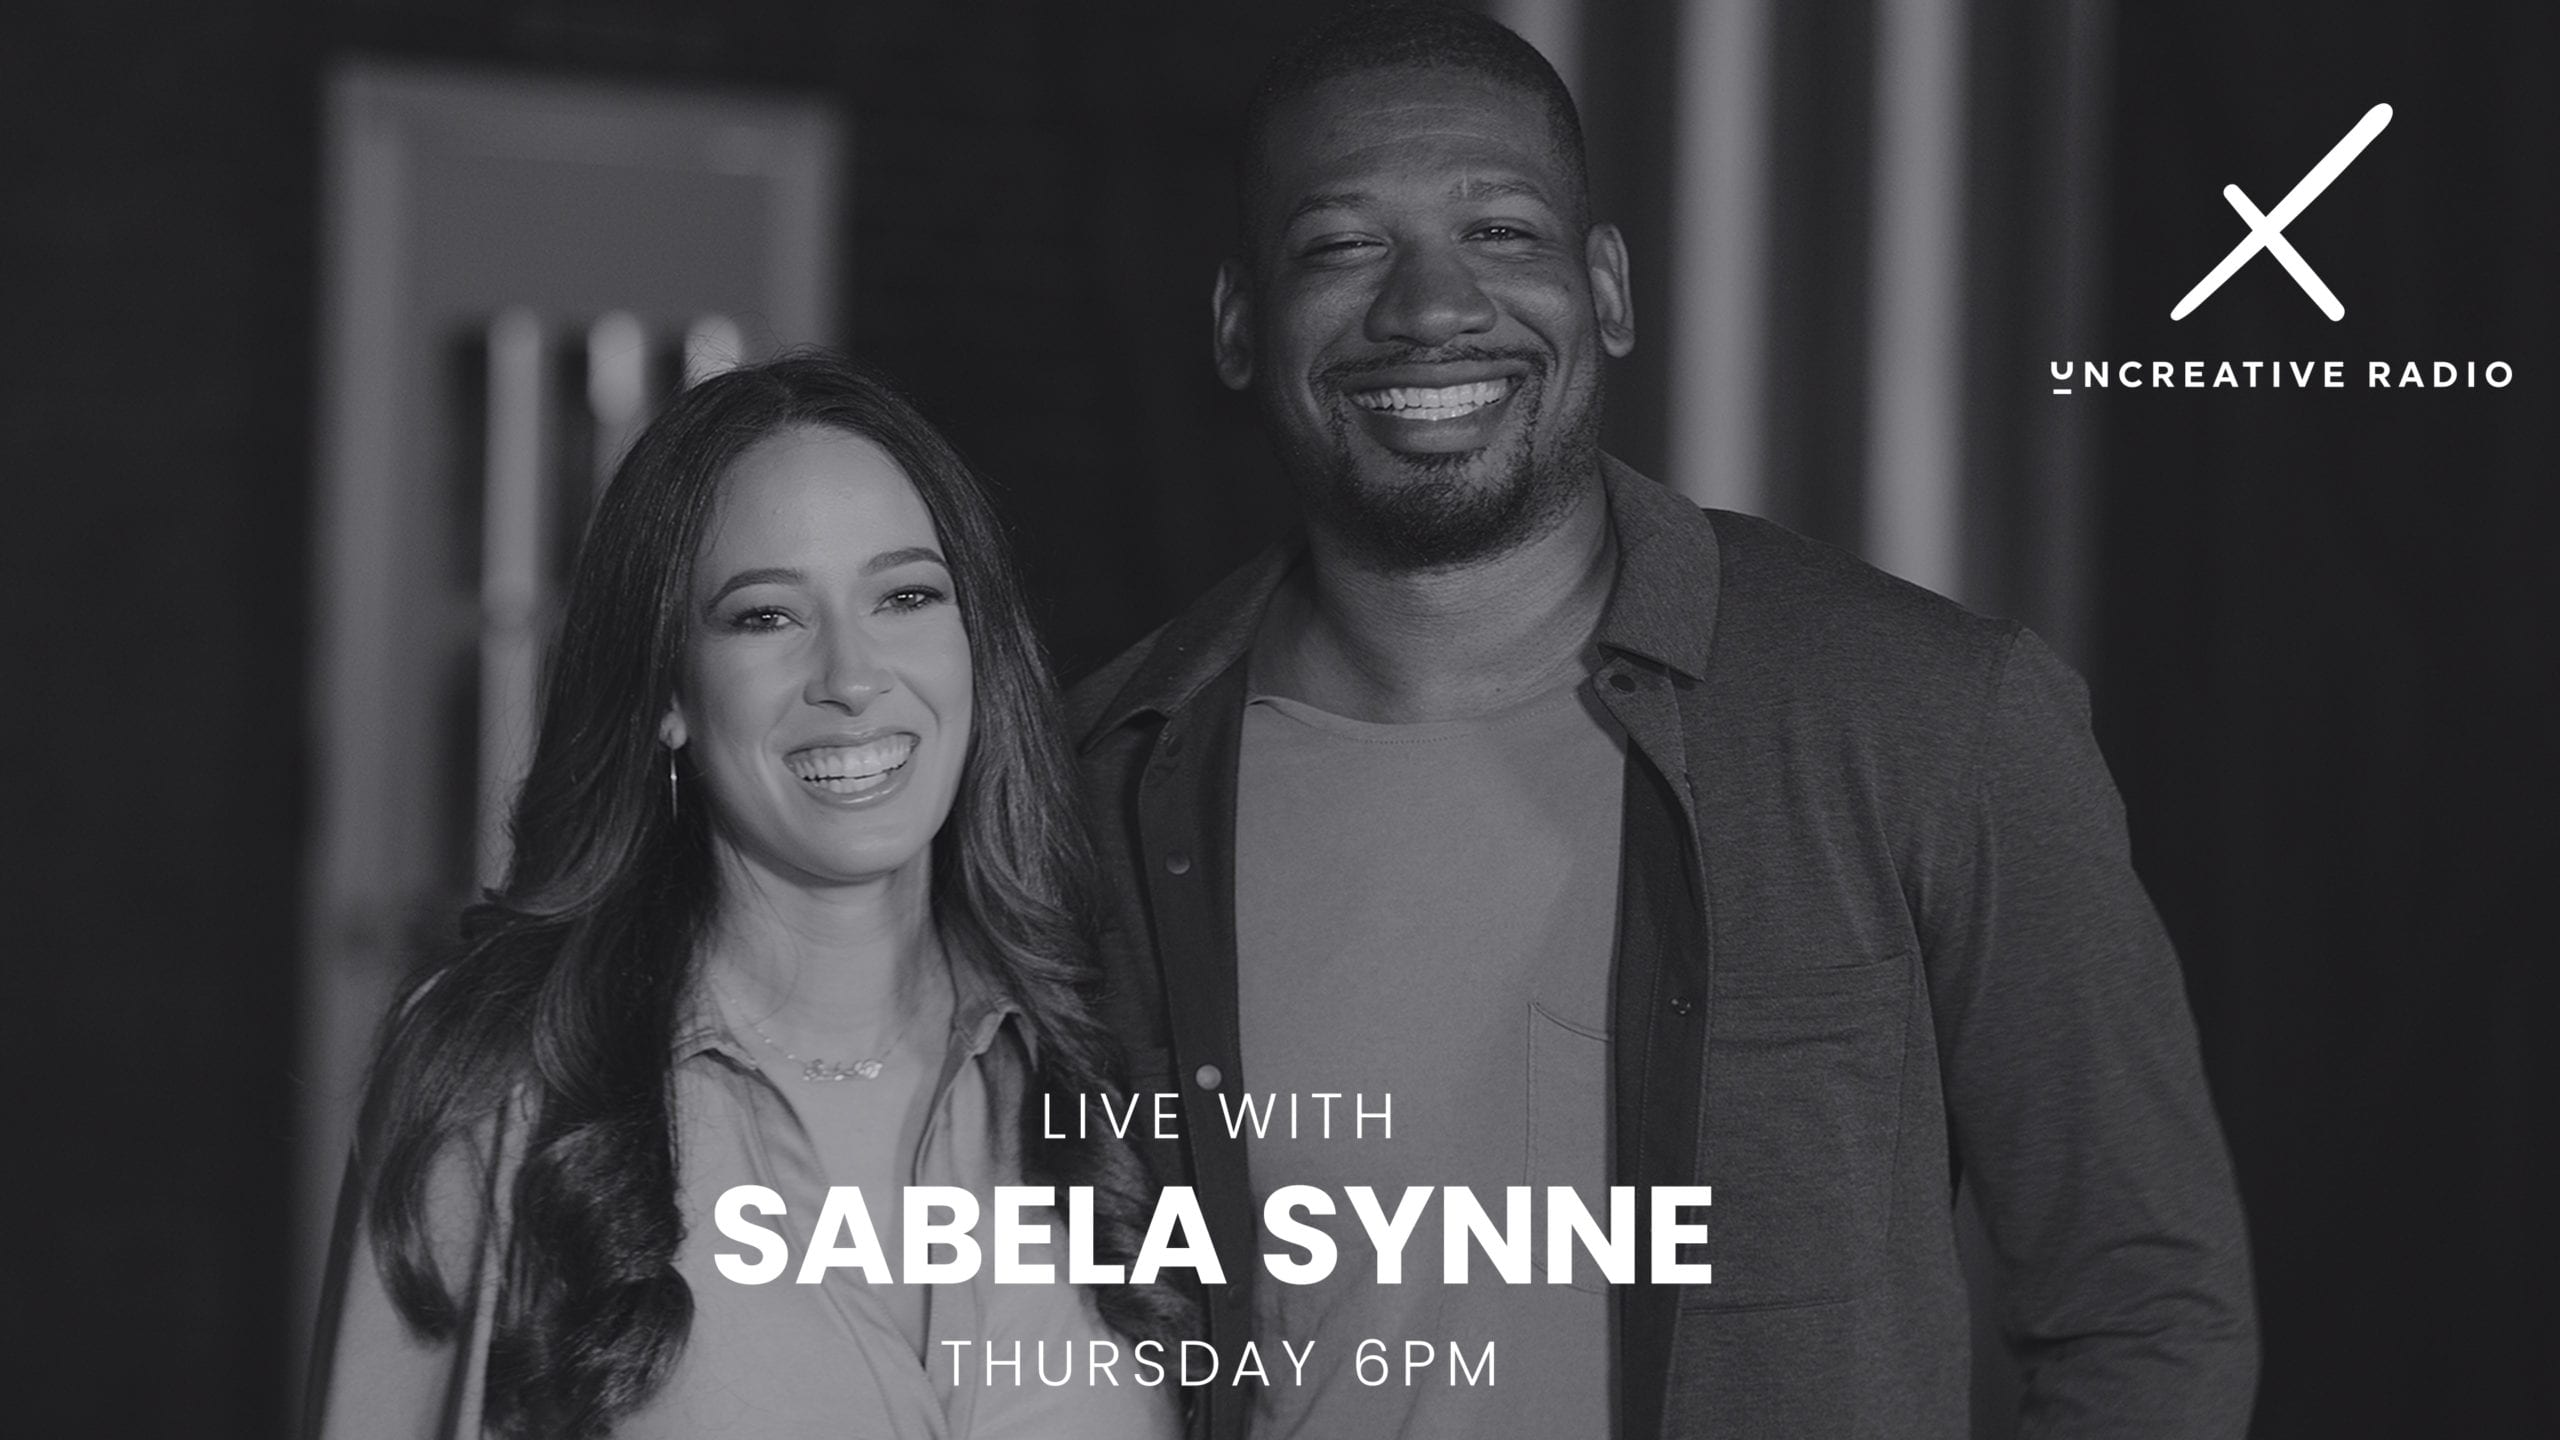 Uncreative Radio Sabela Synne Title Card Episode 4 with backdrop of her with Joshua Miller smiling and posing for the camera